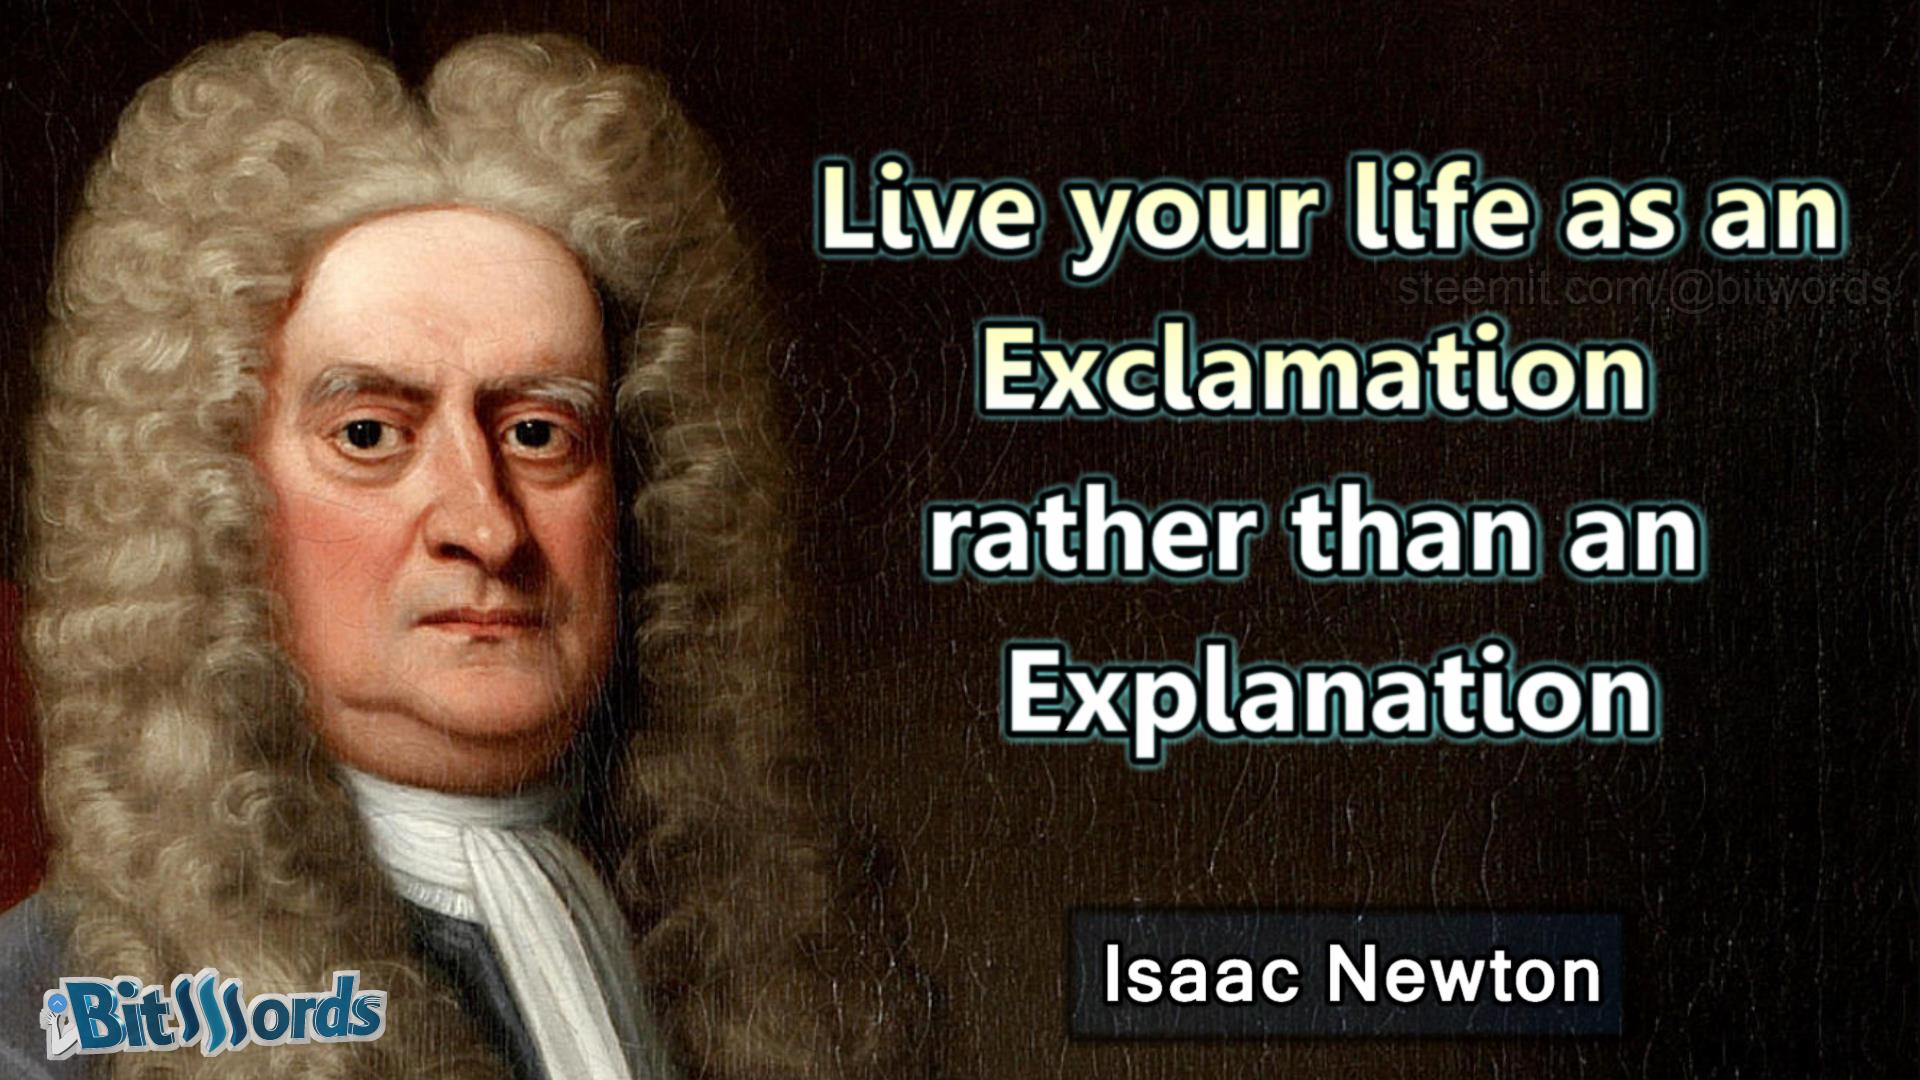 bitwords steemit Daily Dose of Motivation Live your life as an Exclamation rather than an Explanation Isaac Newton.jpg